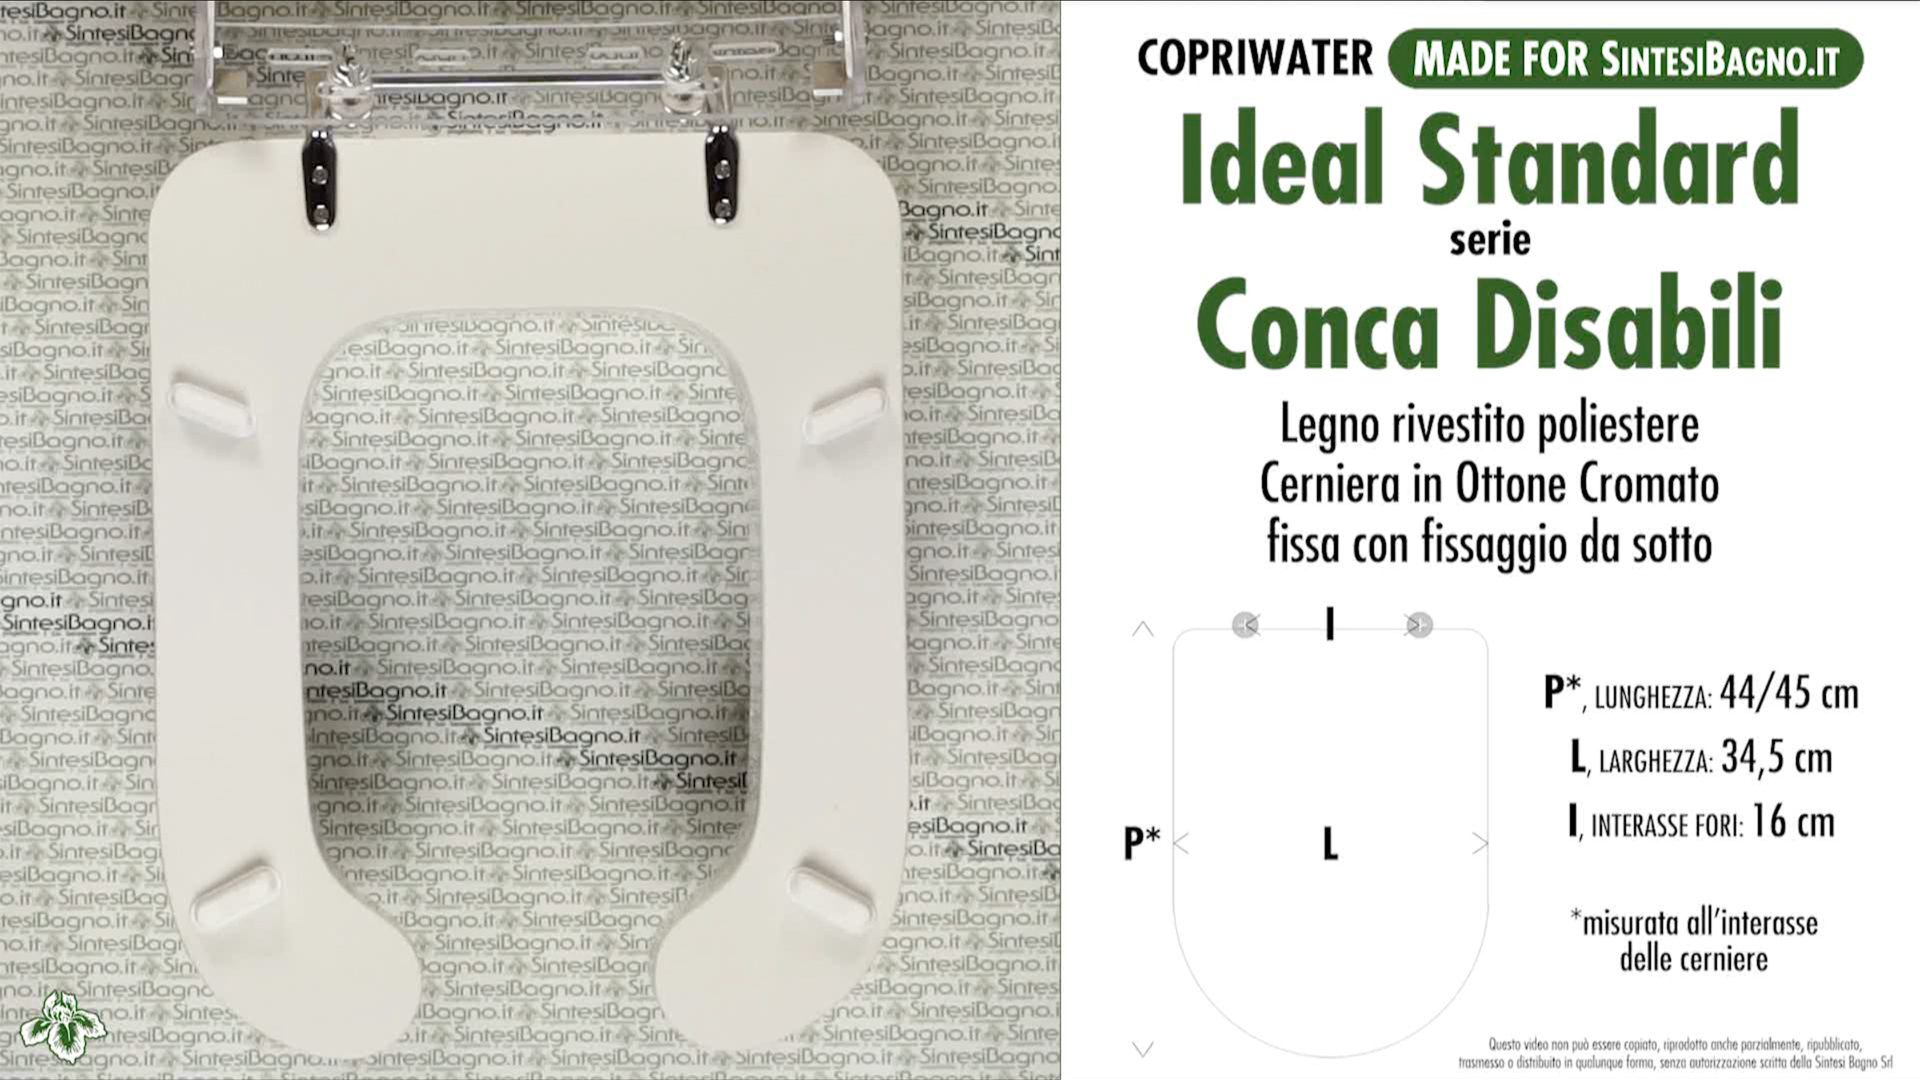 Wc Seat For Wc Conca Disabled Ideal Standard Type Dedicated Wood Covered Sintesibagno Shop Online